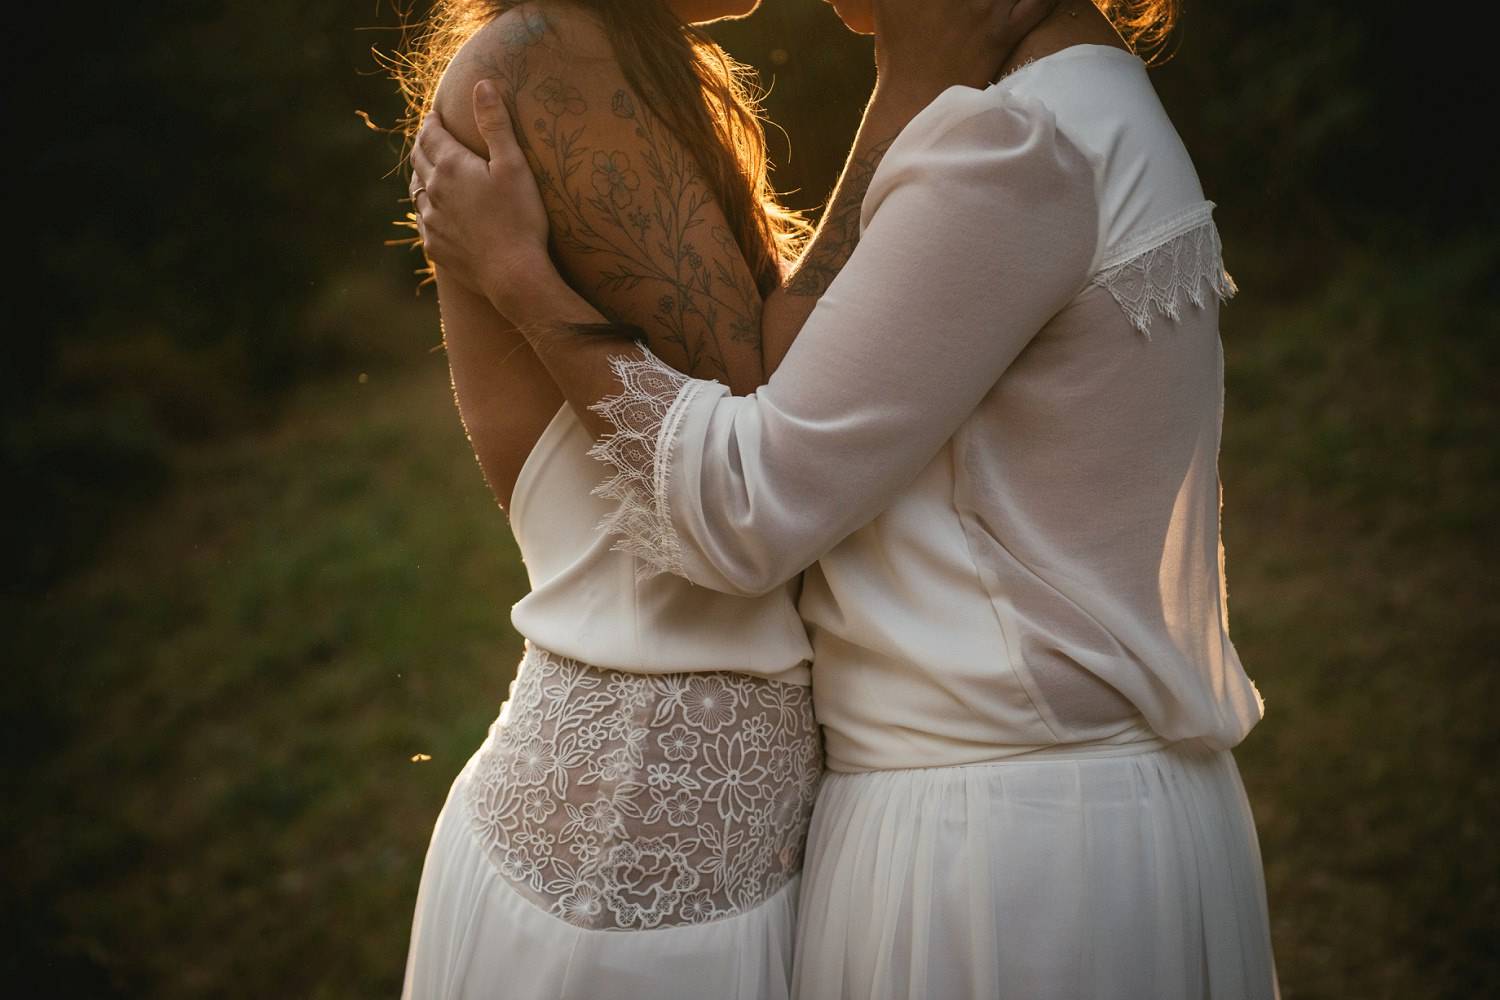 This detail shot of two women embracing belly-to-belly shows off the gorgeous details of their wedding dresses